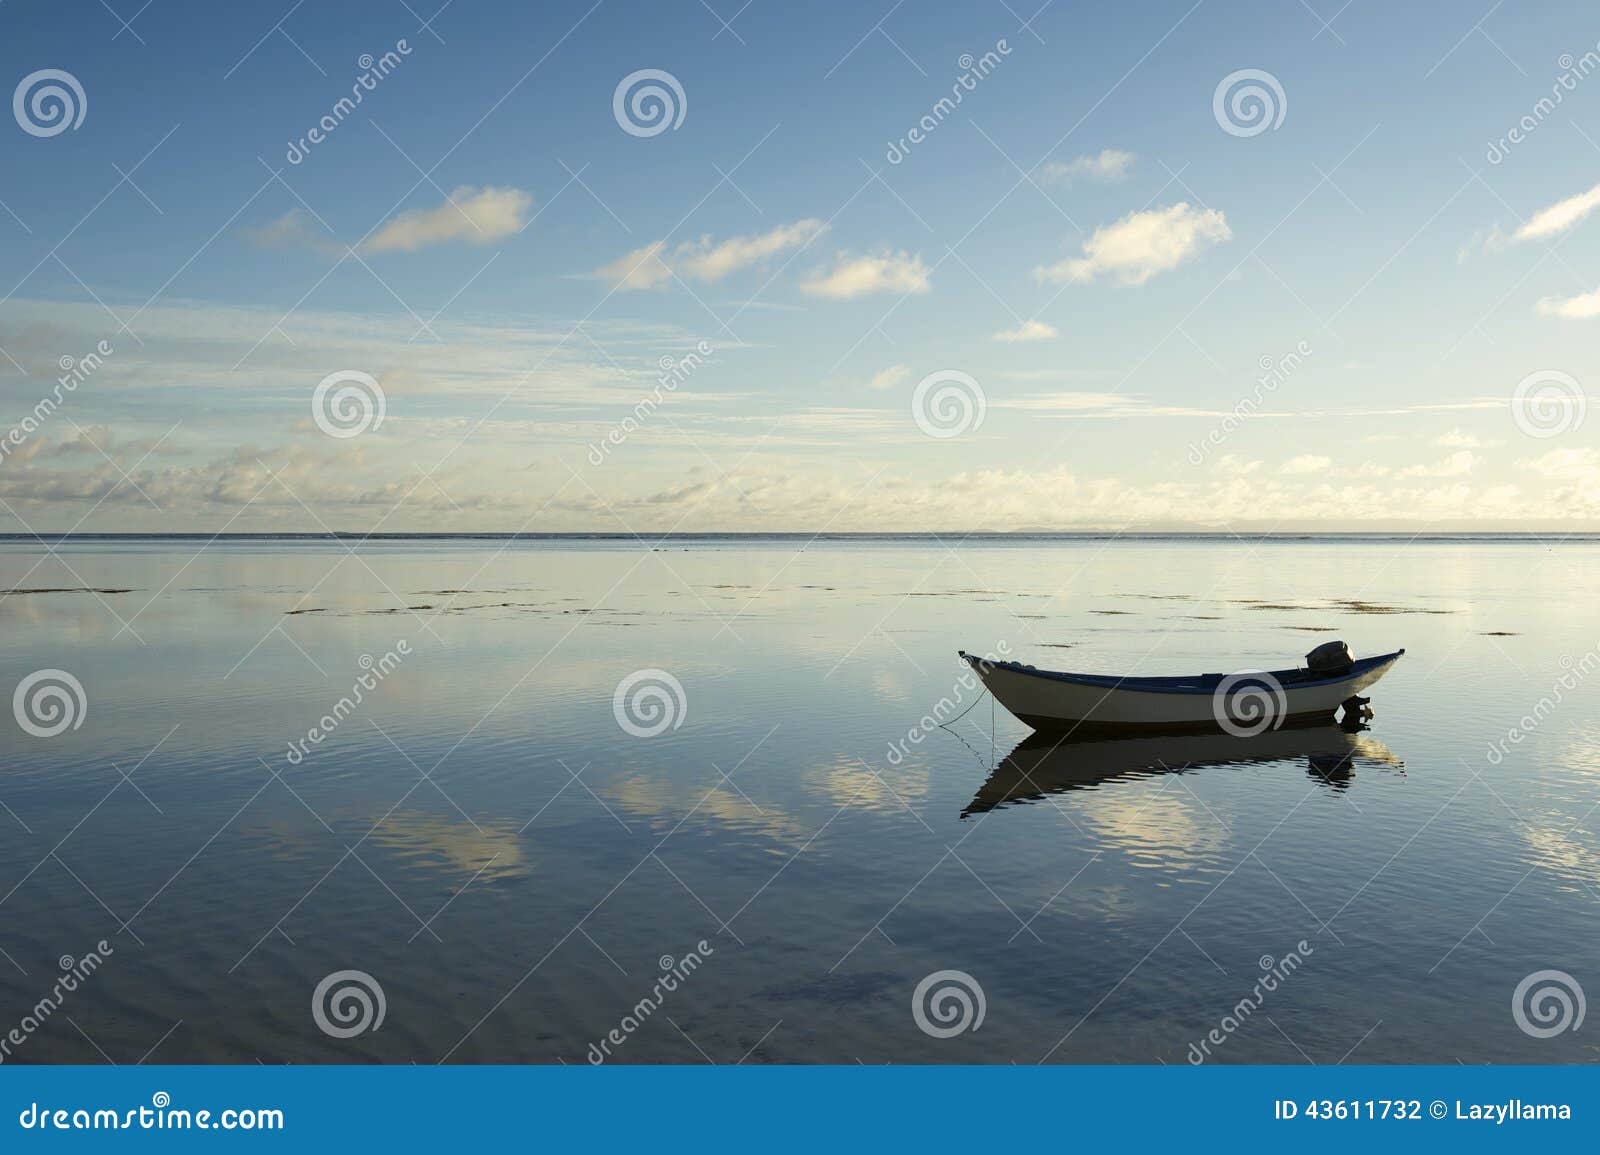 simple boat floating in calm water